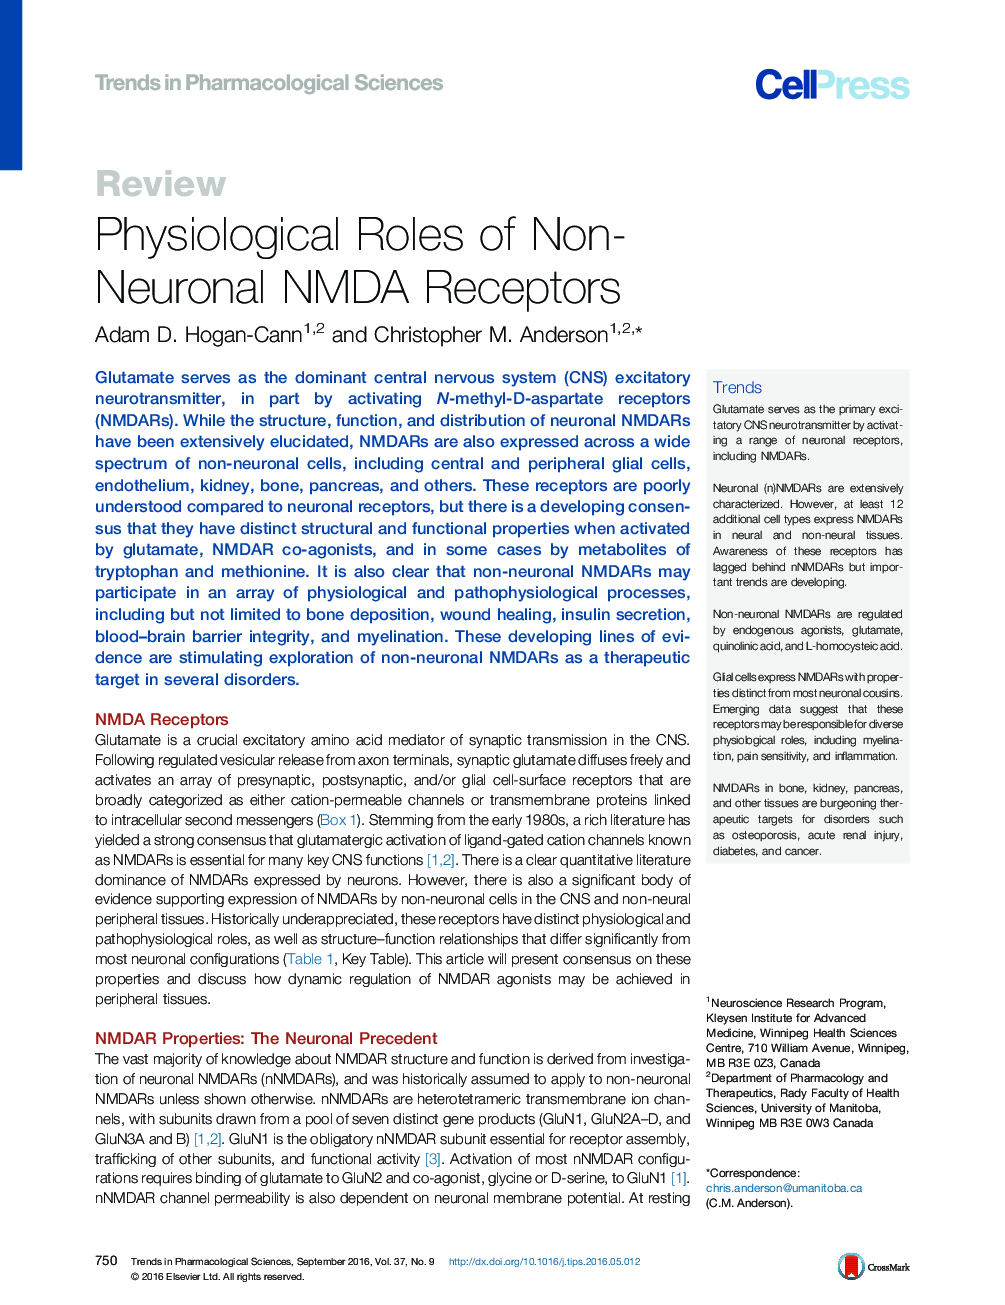 Physiological Roles of Non-Neuronal NMDA Receptors